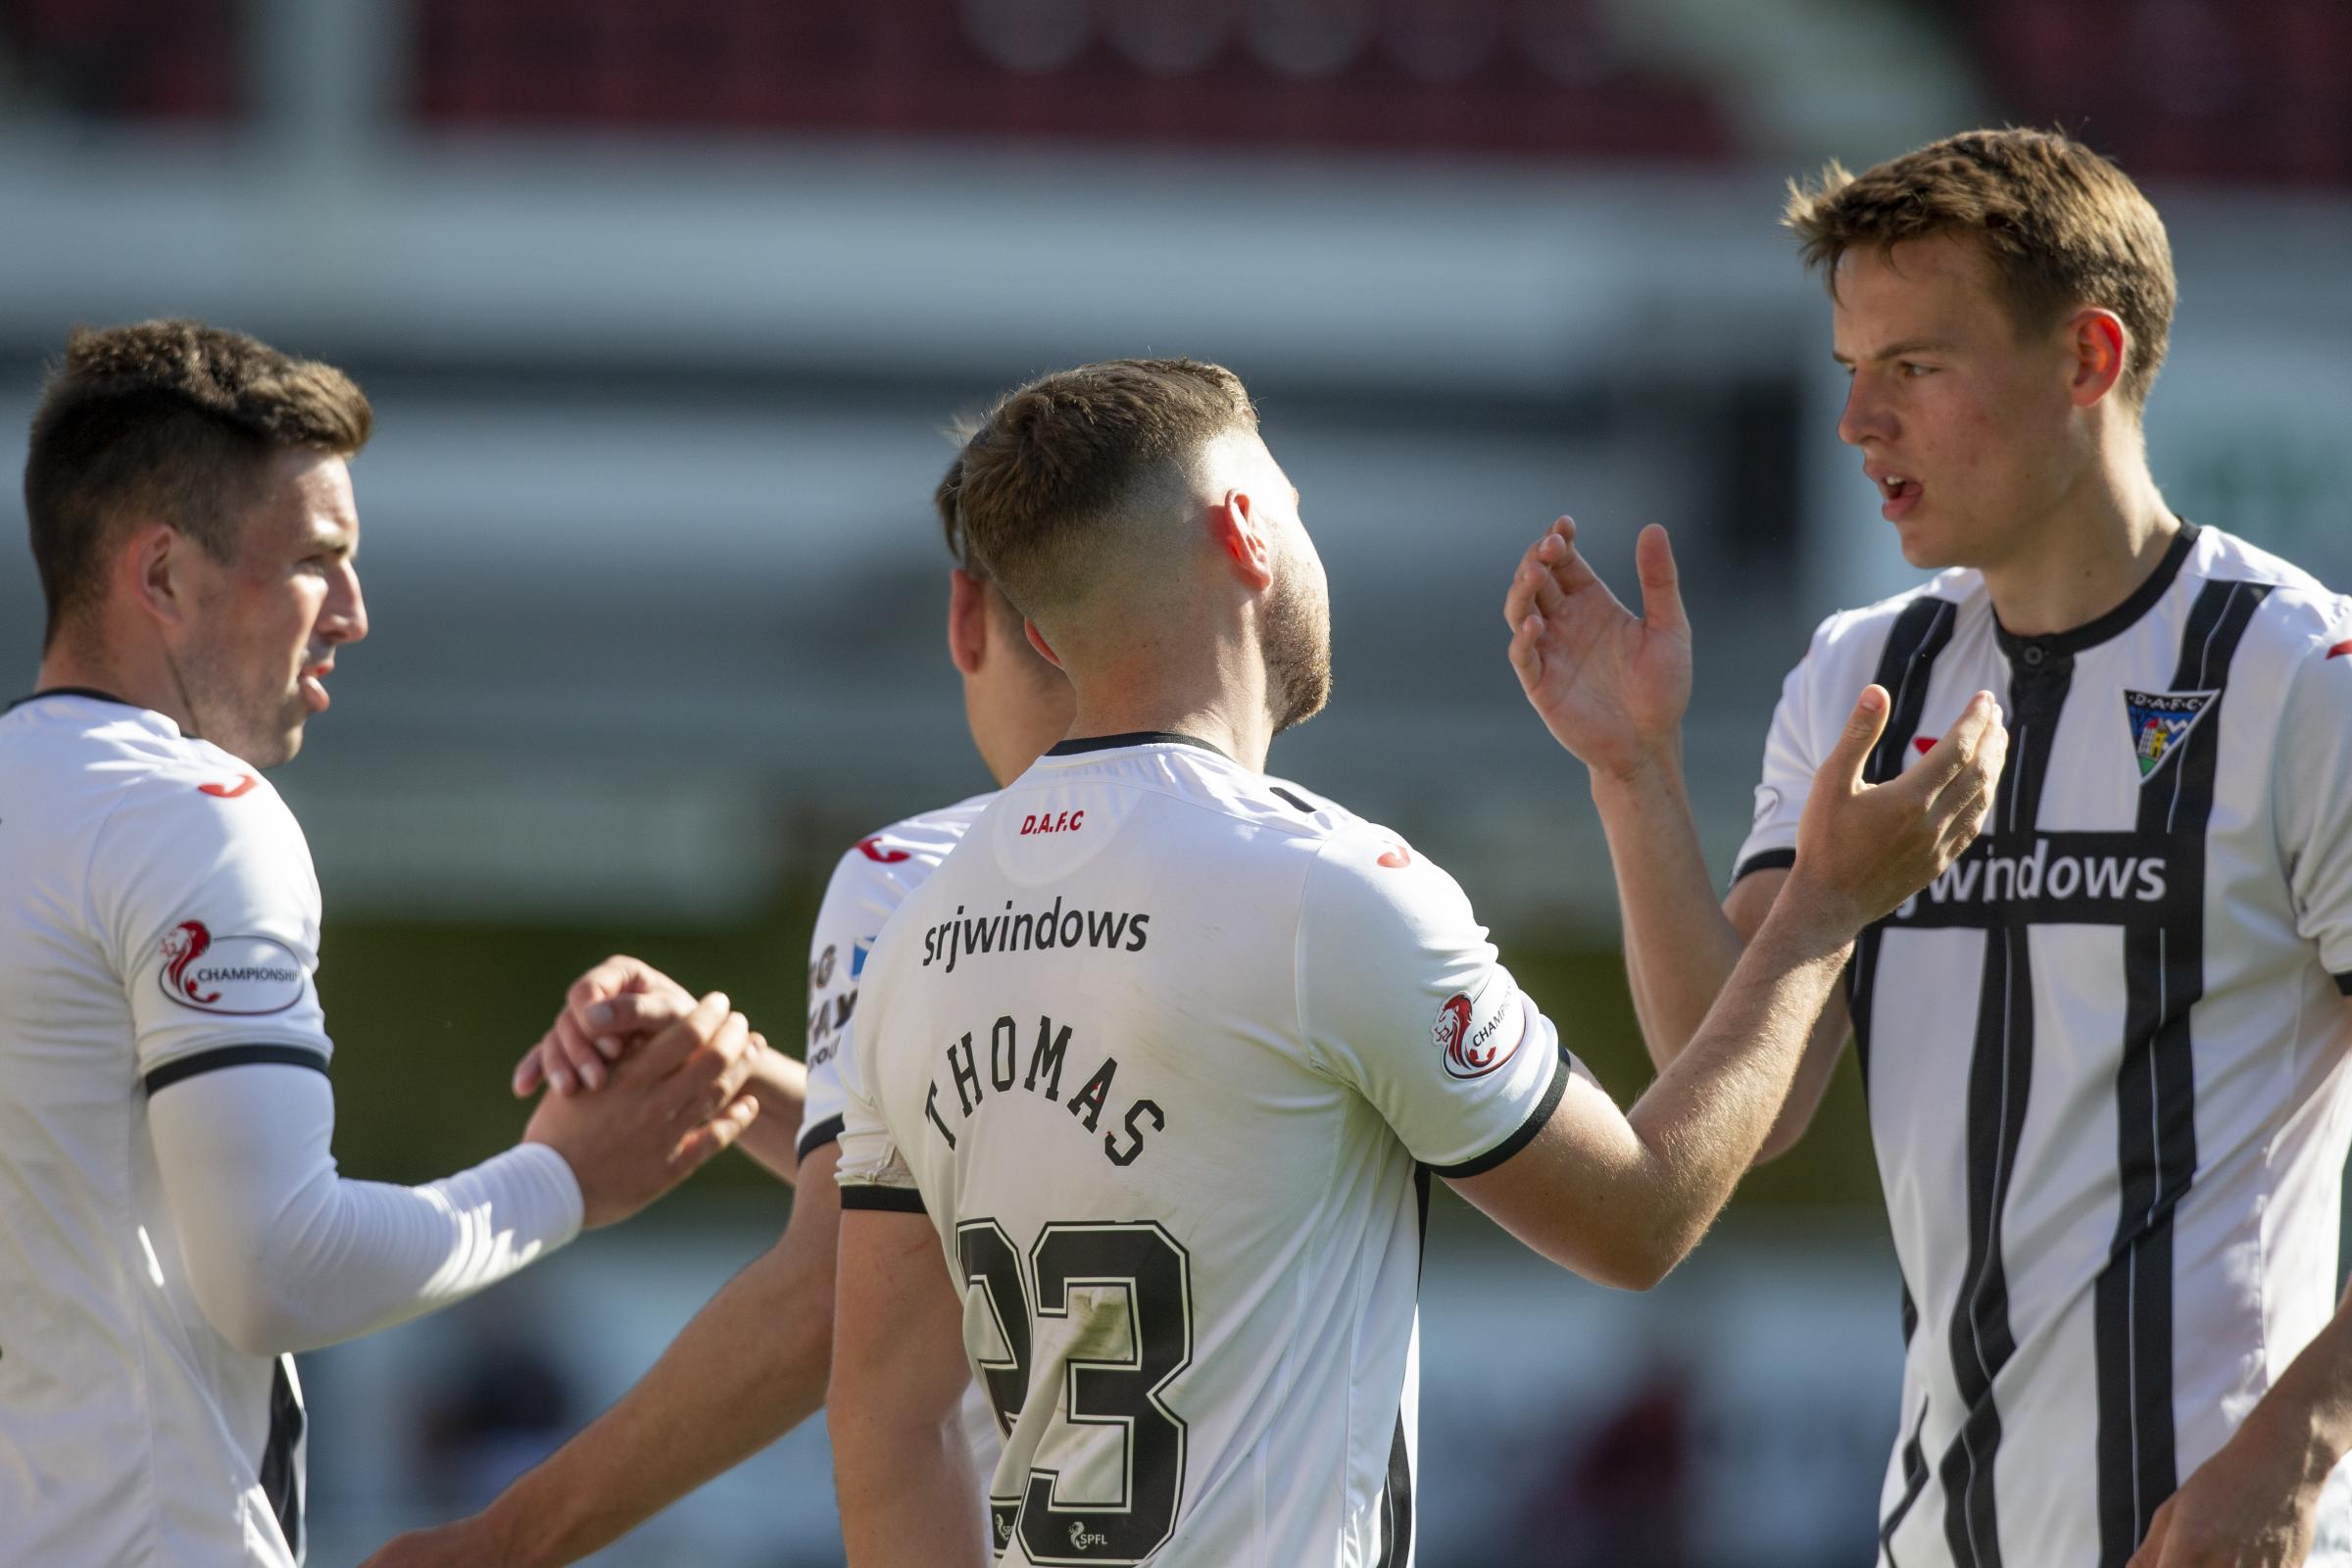 Dunfermline face Alloa in final league game before play-offs